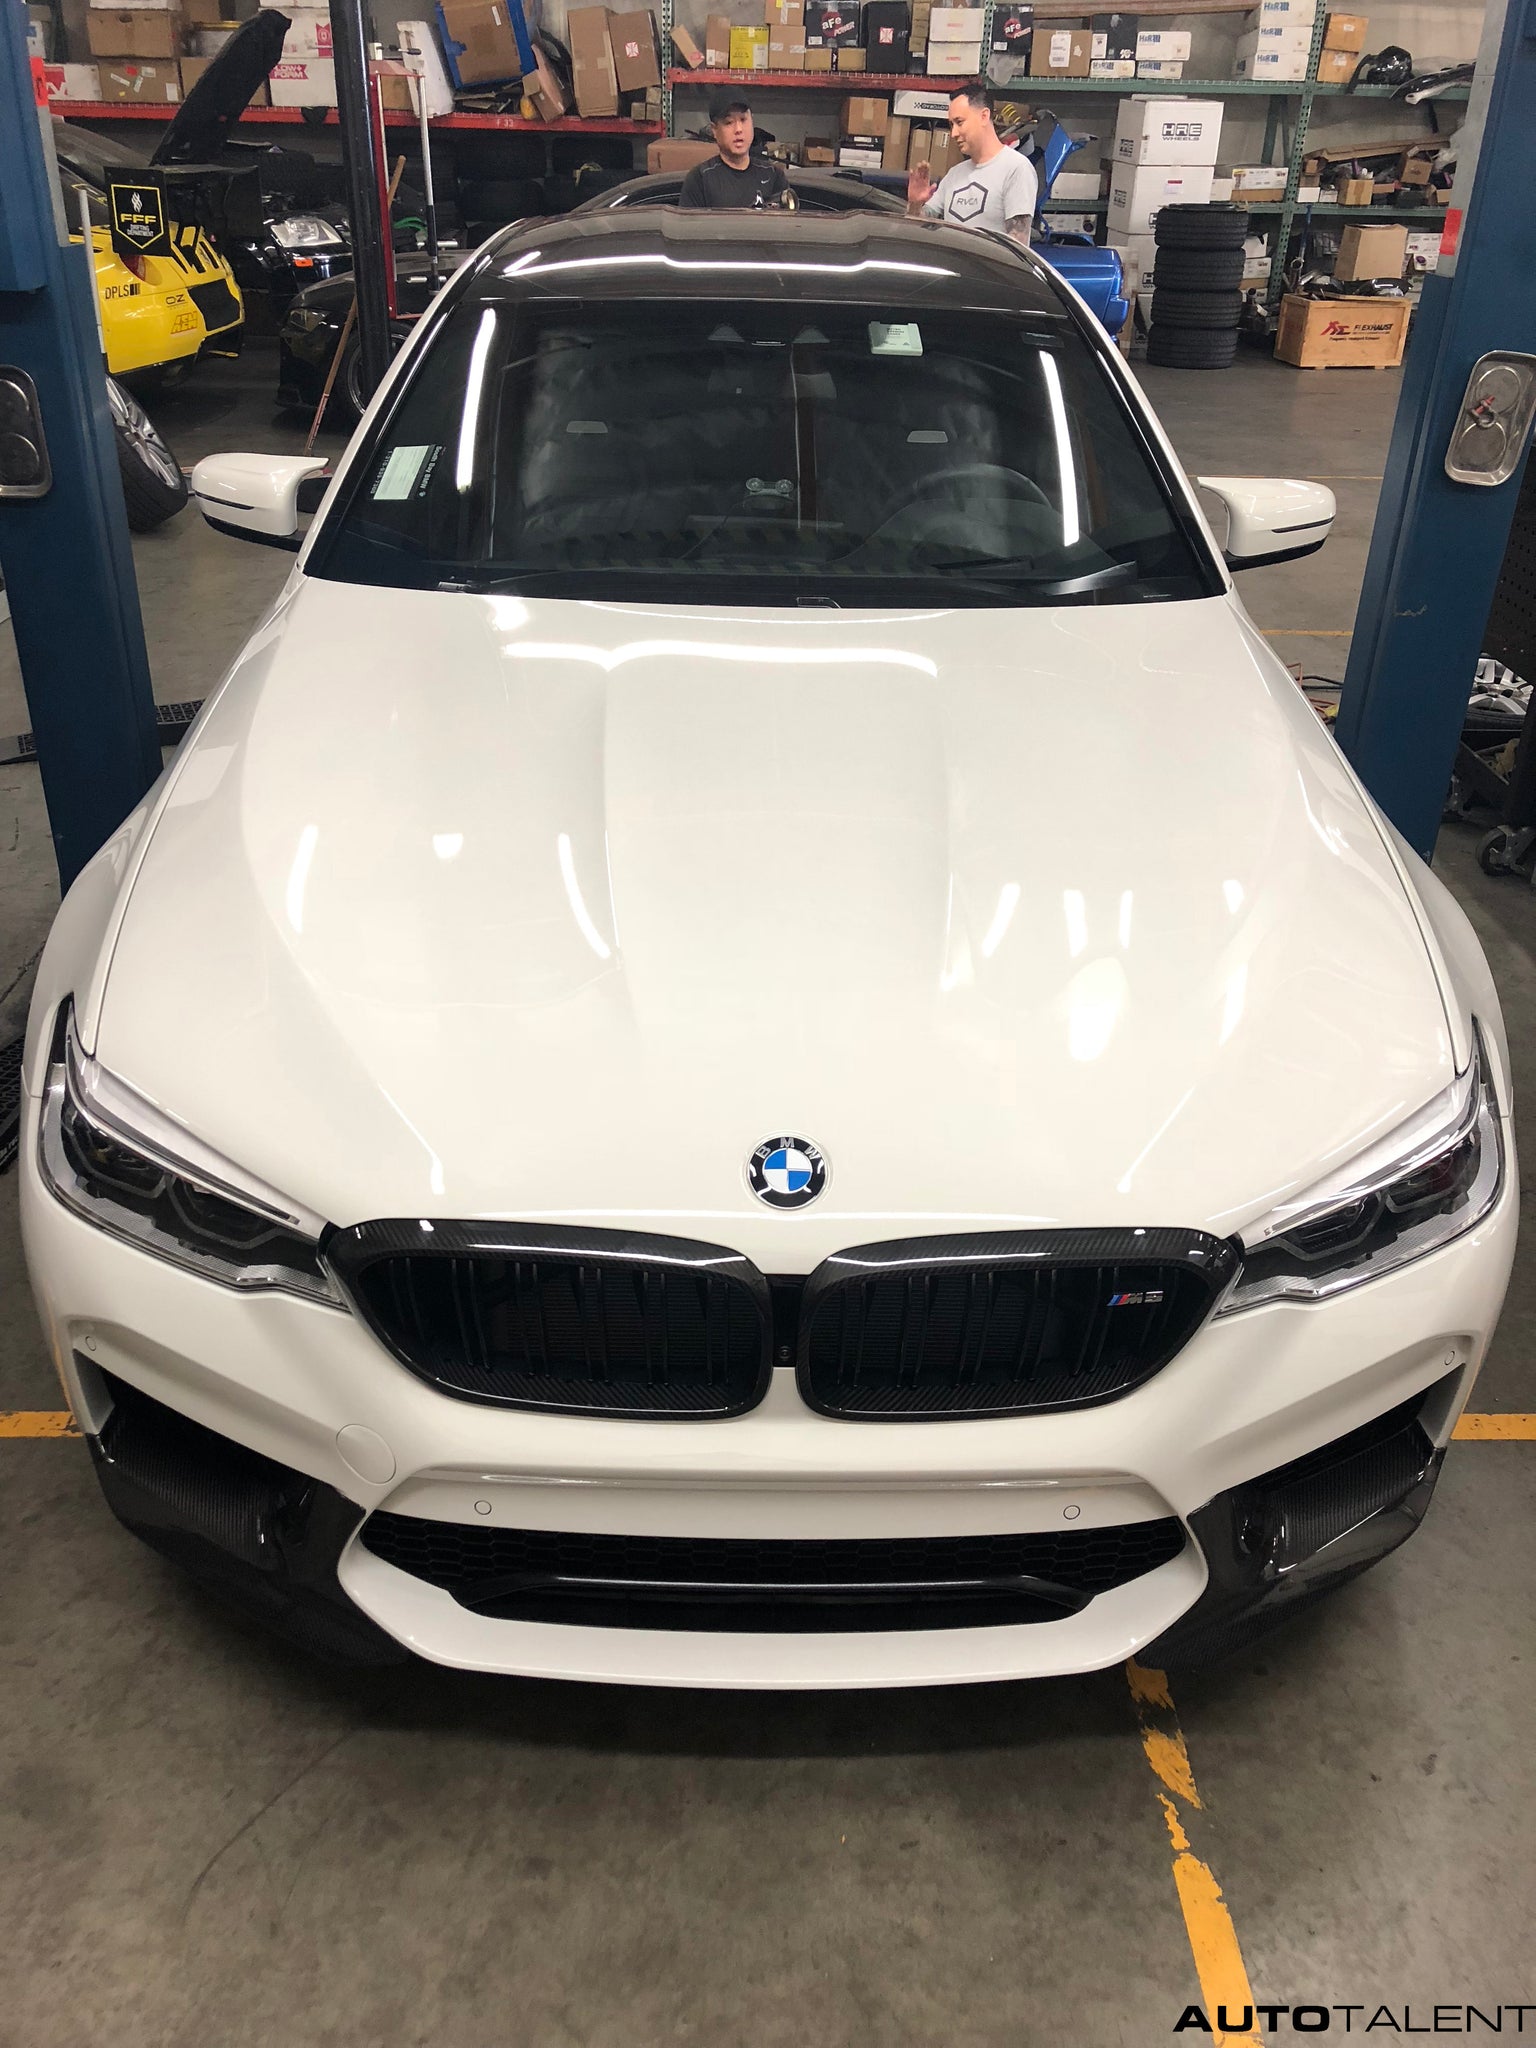 BMW F90 M5 on lift to get Akrapovic evolution installed exhaust 